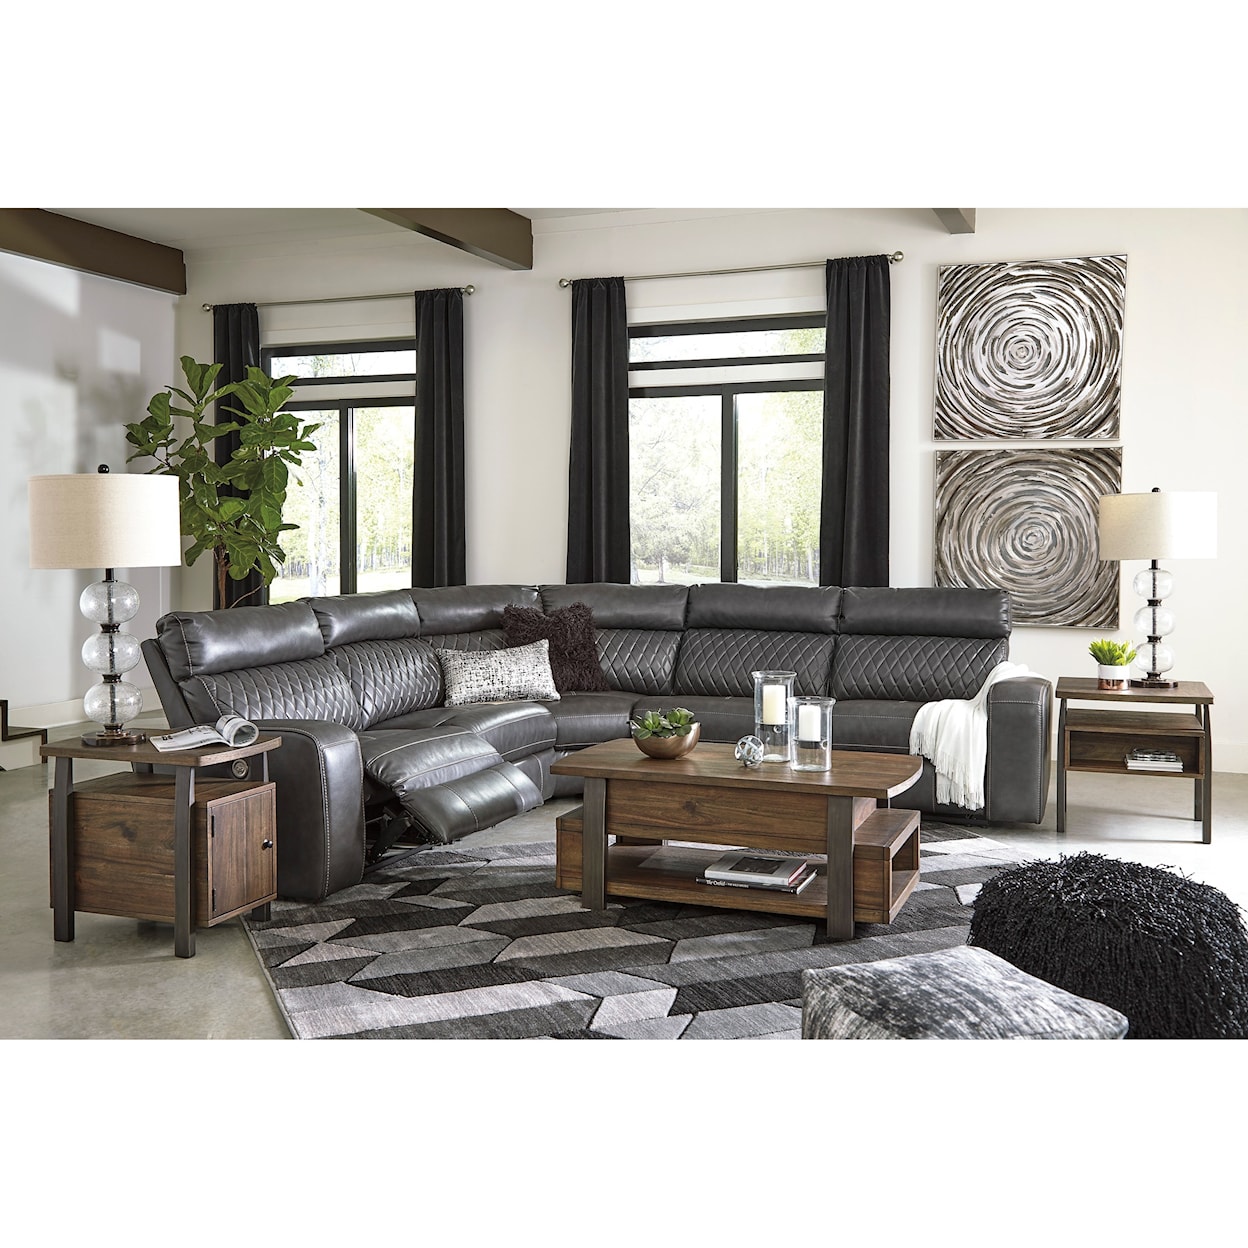 StyleLine Samperstone Power Reclining Sectional Sofa